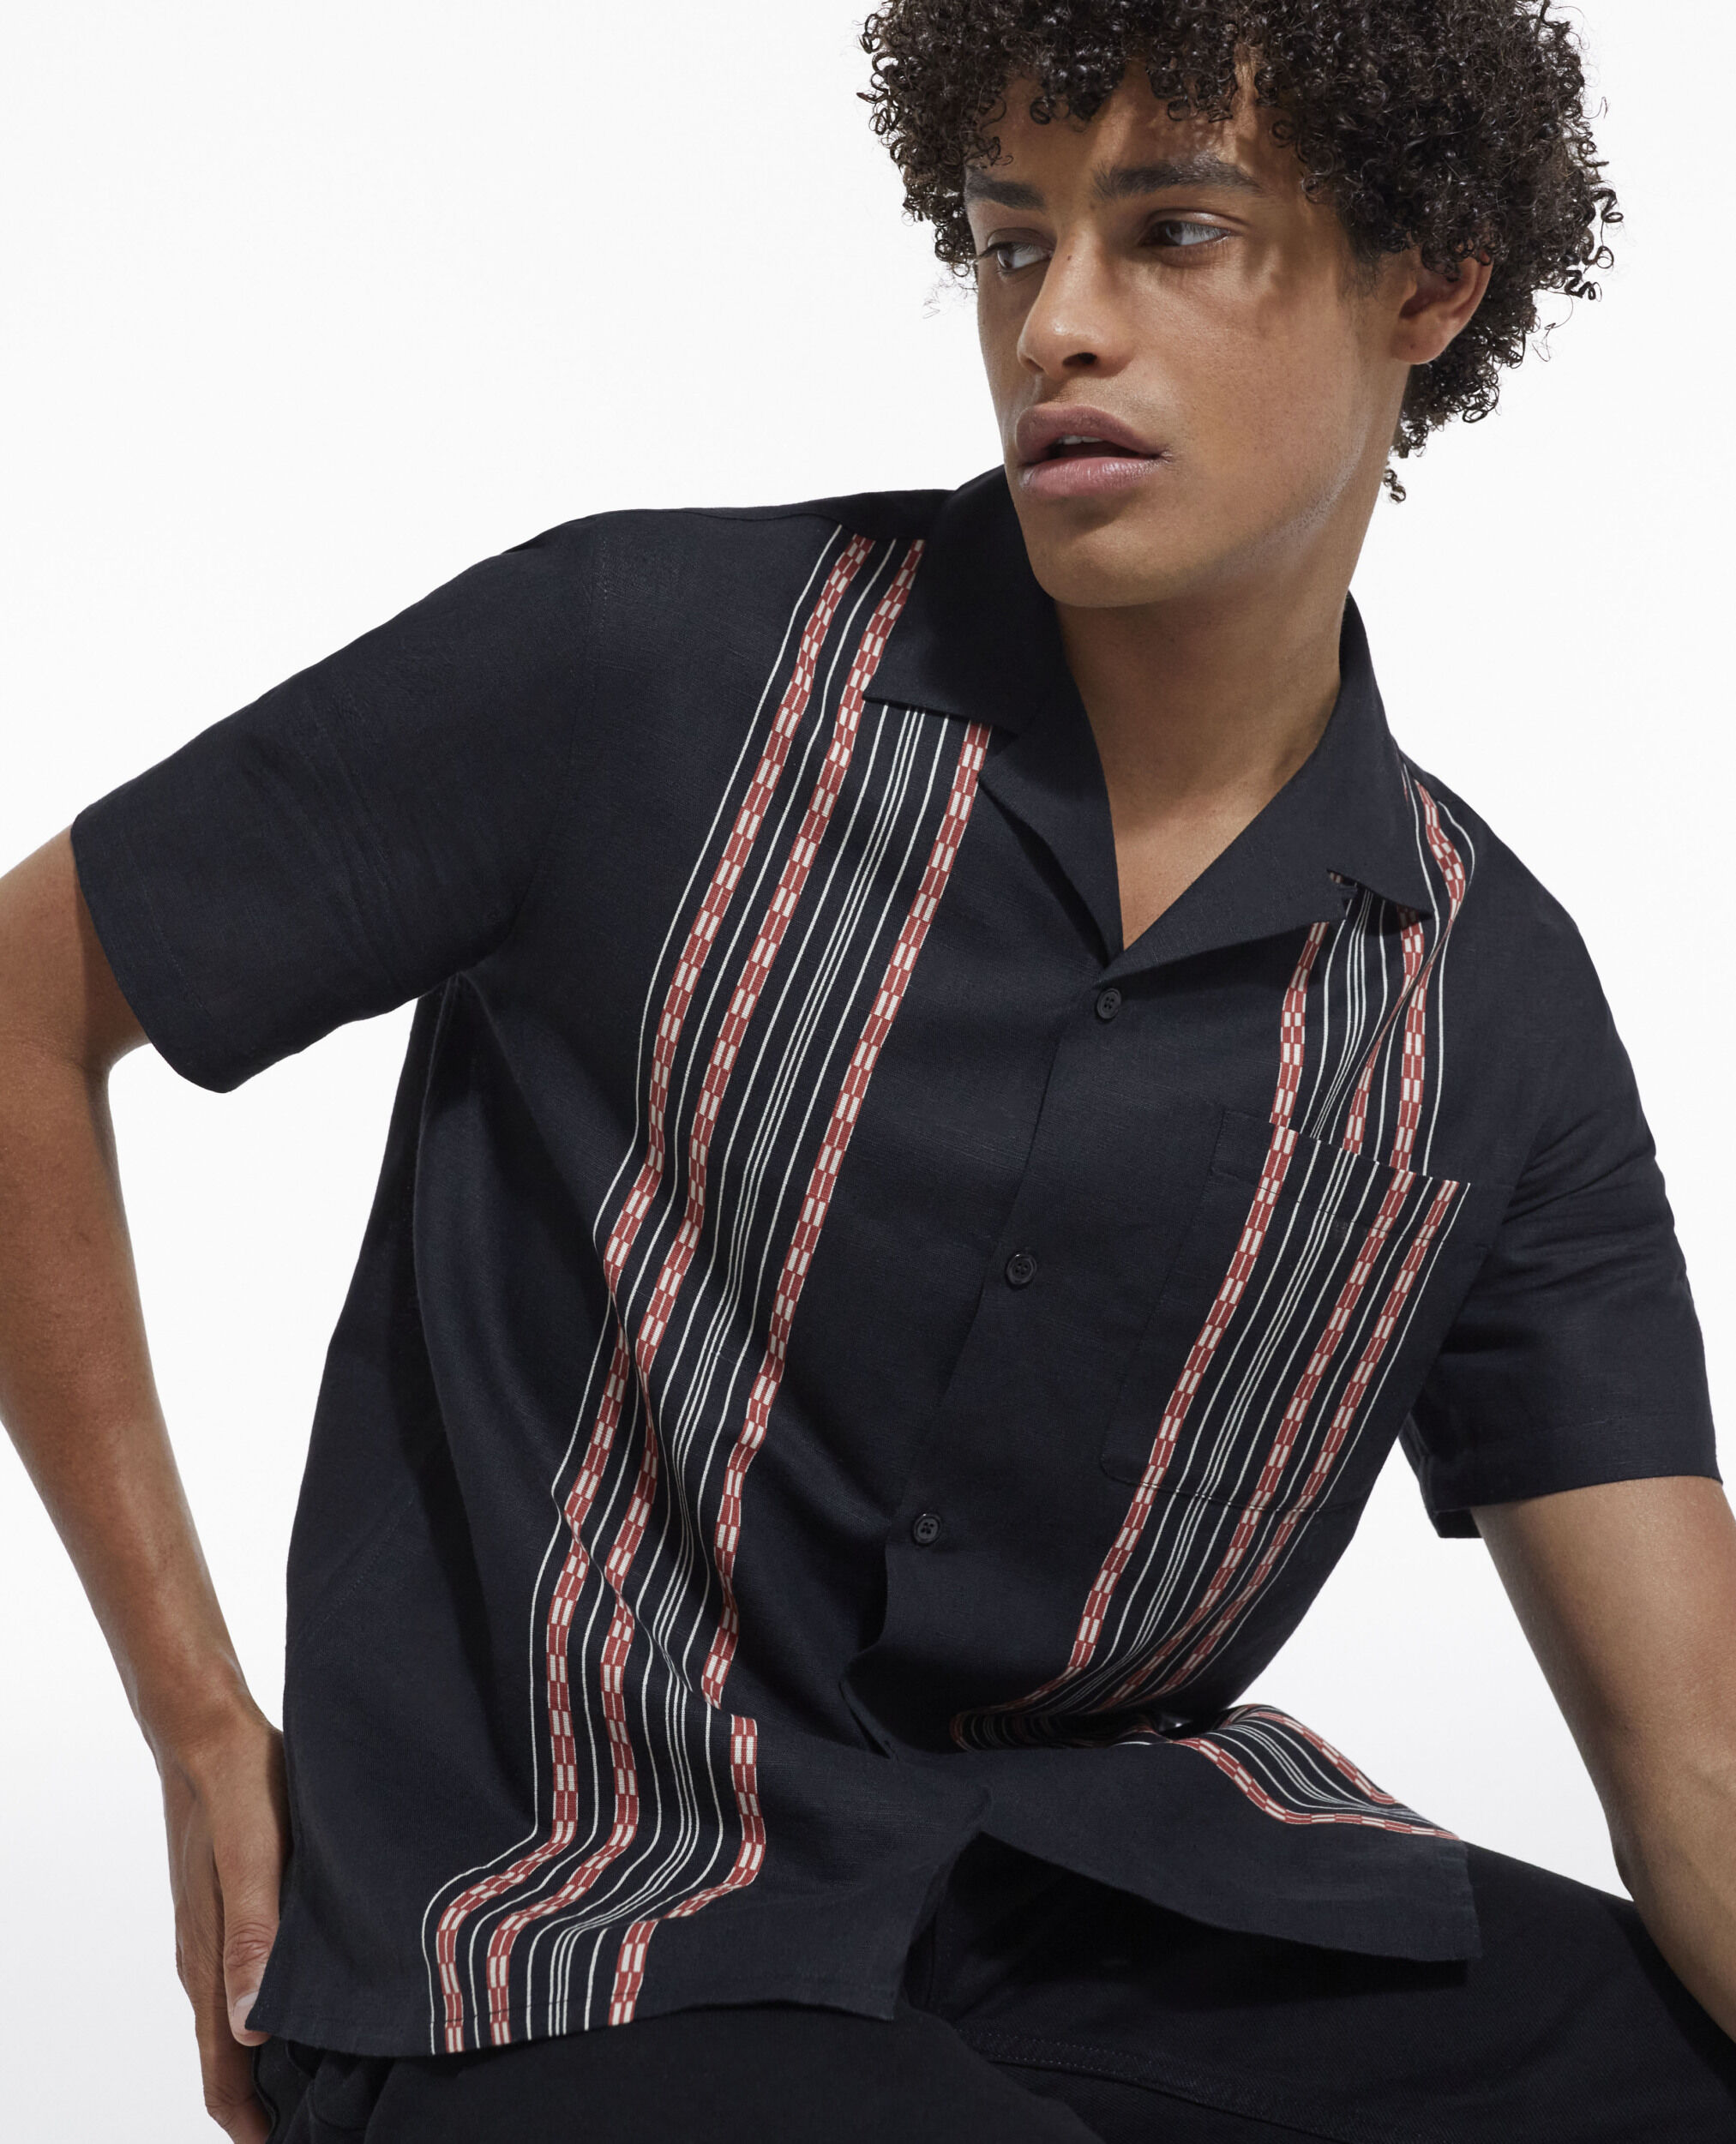 Cotton linen shirt with contrasting stripes, BLACK - RED, hi-res image number null